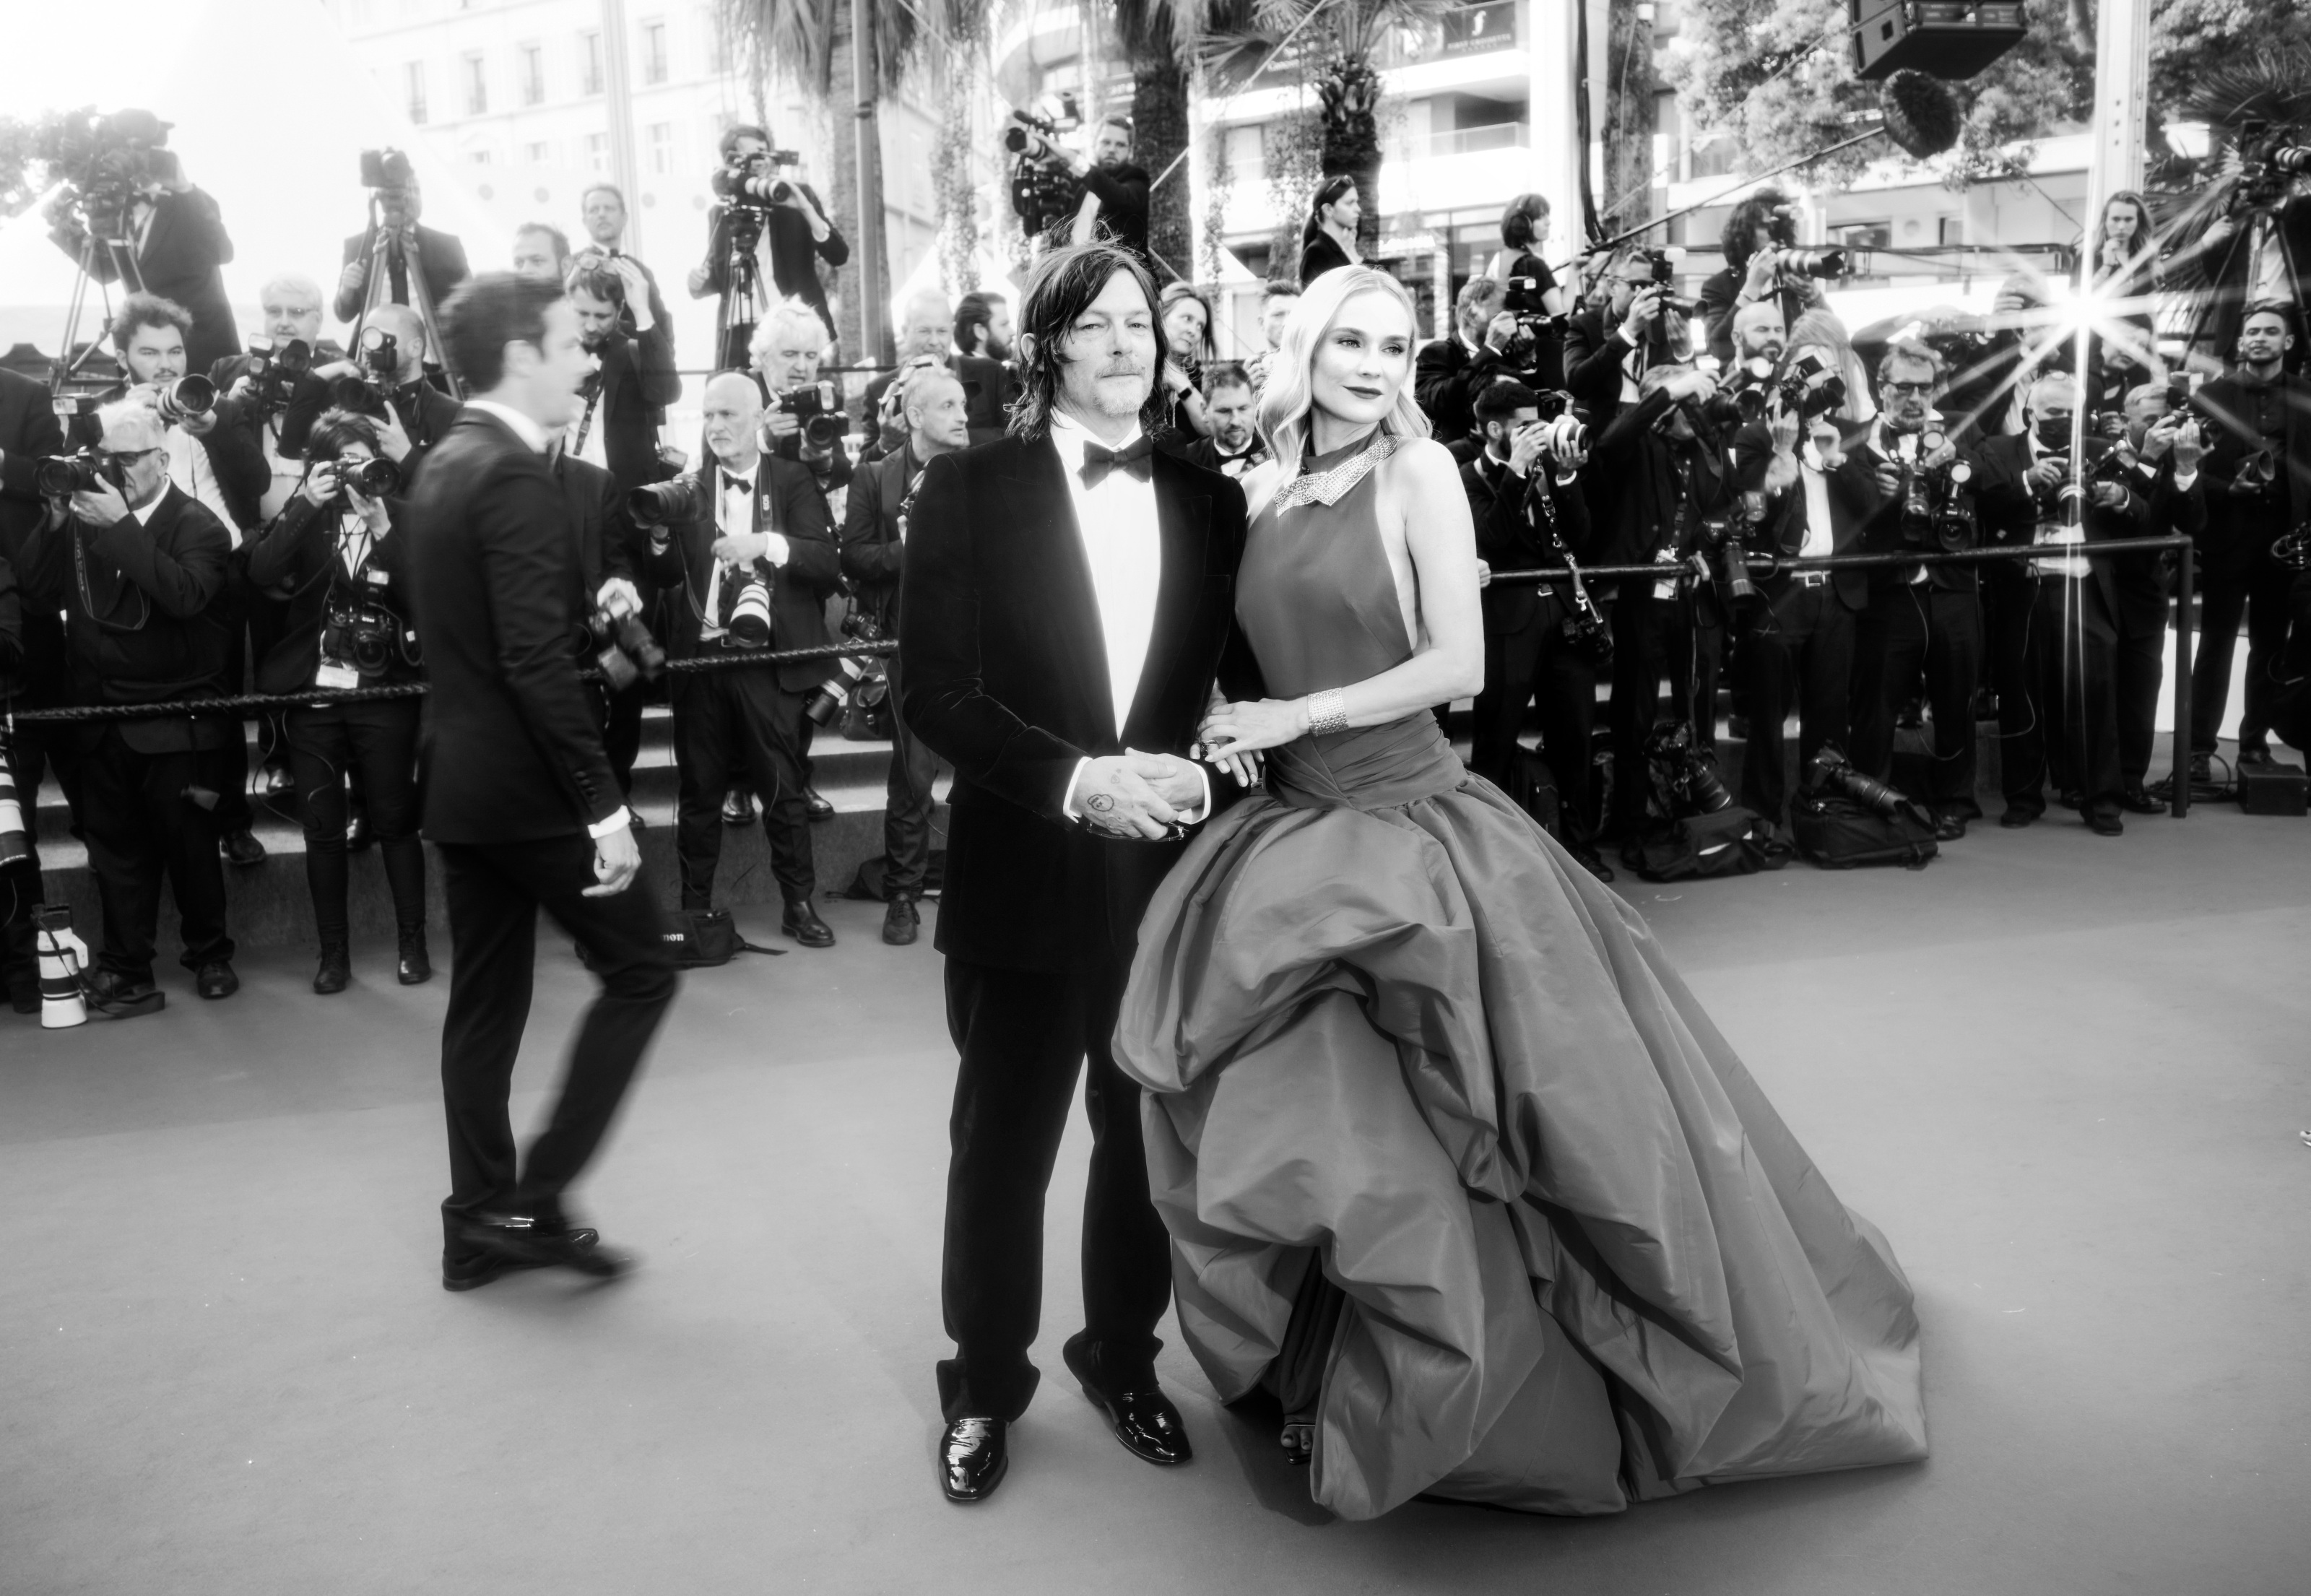 Norman Reedus and Diane Kruger are engaged